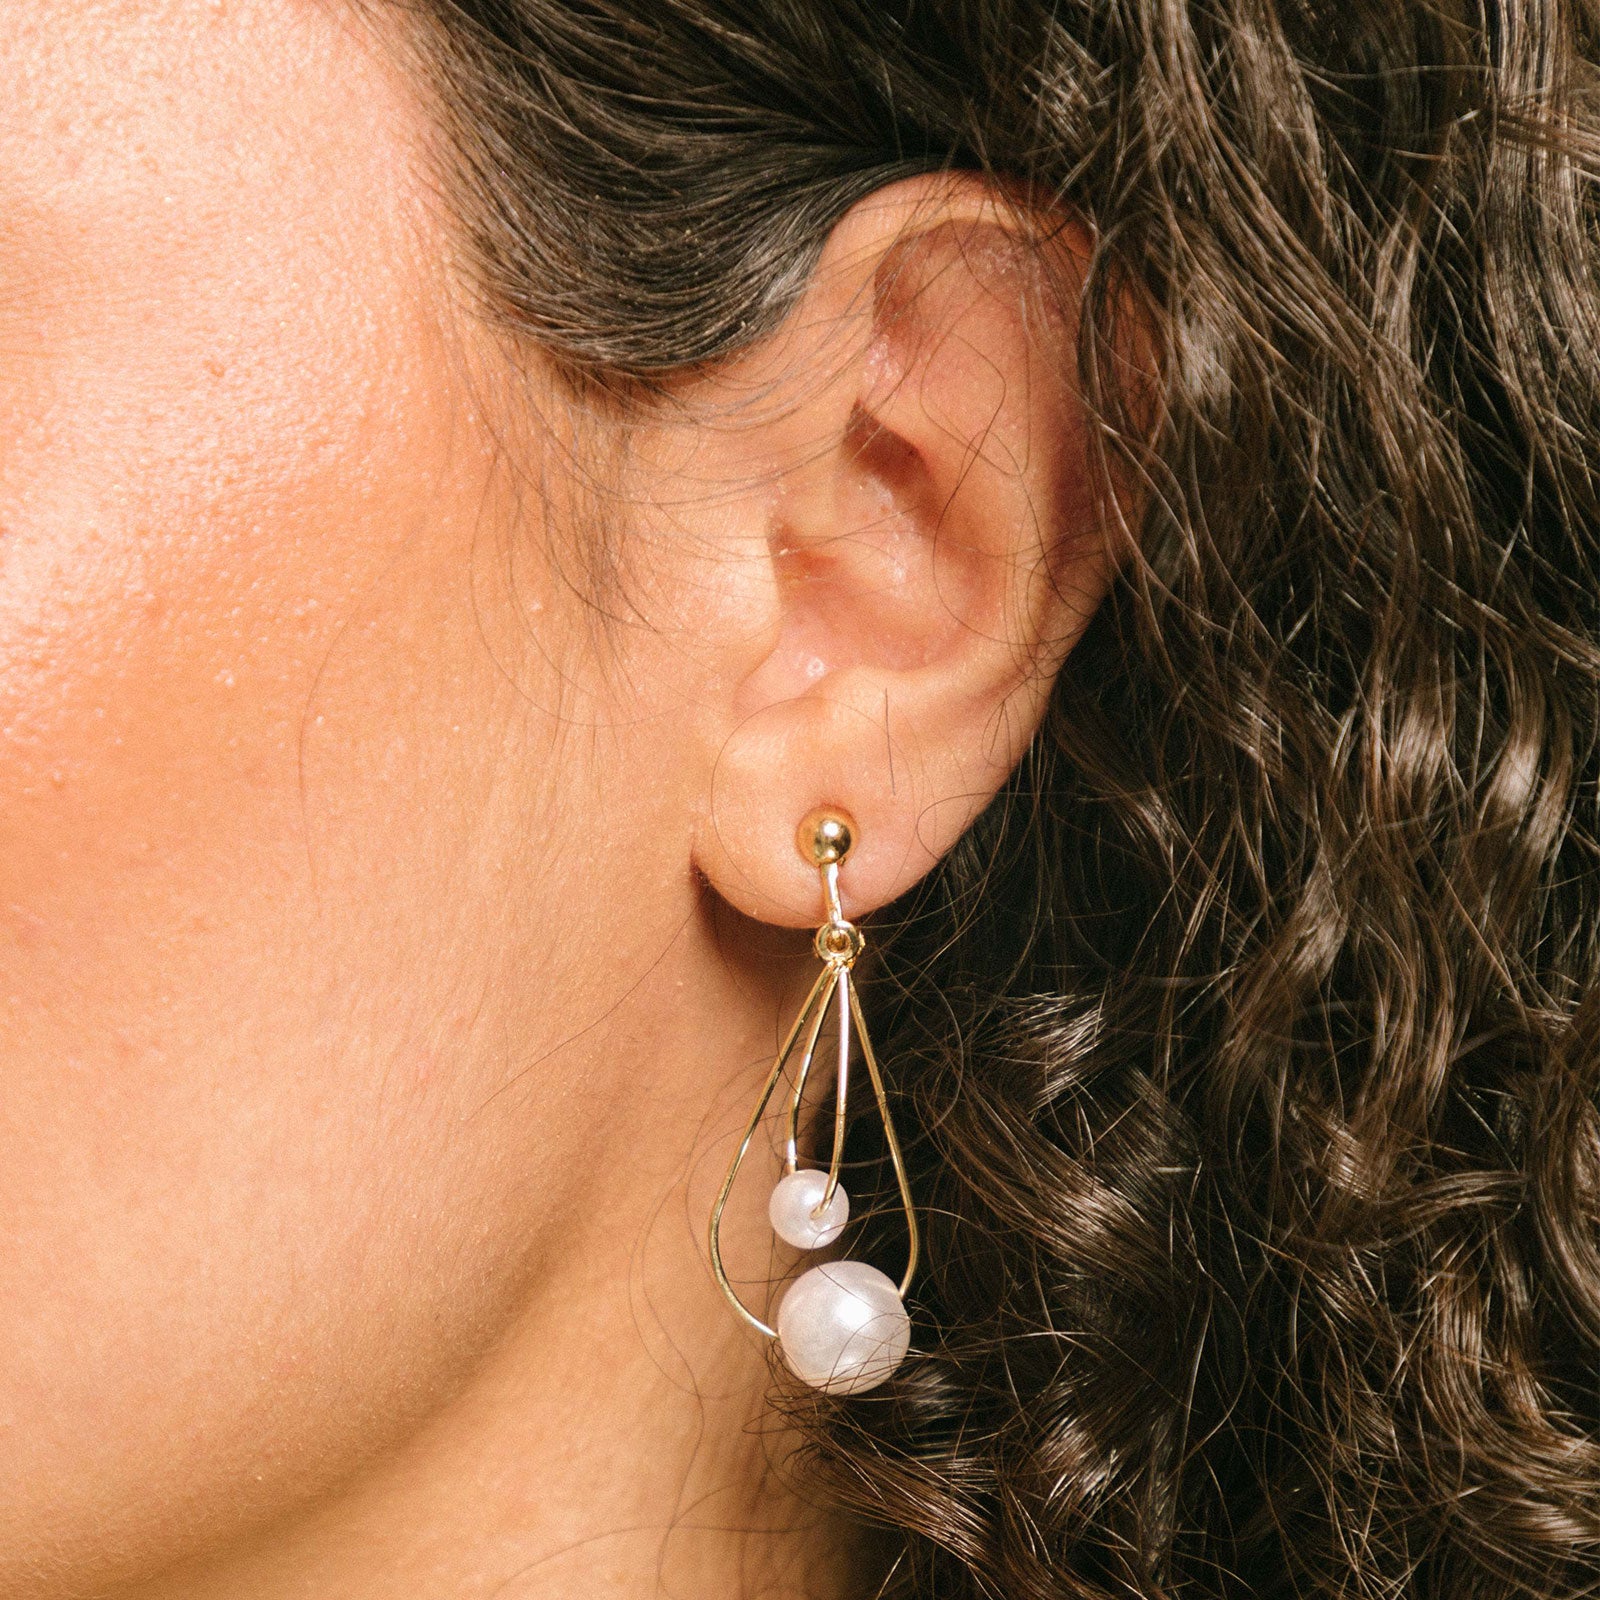 A model wearing Camilla Clip-On Earrings, these alluring screwback clip-on earrings boast a gleaming gold-plated metal alloy and faux pearl, rendering them an exquisite accessory for all ear types. Synergizing with a variety of looks, these figure-eight hoop earrings are ideal for thick/large, sensitive, small/thin, and stretched/healing ears, making them a must-have for any chic ensemble.